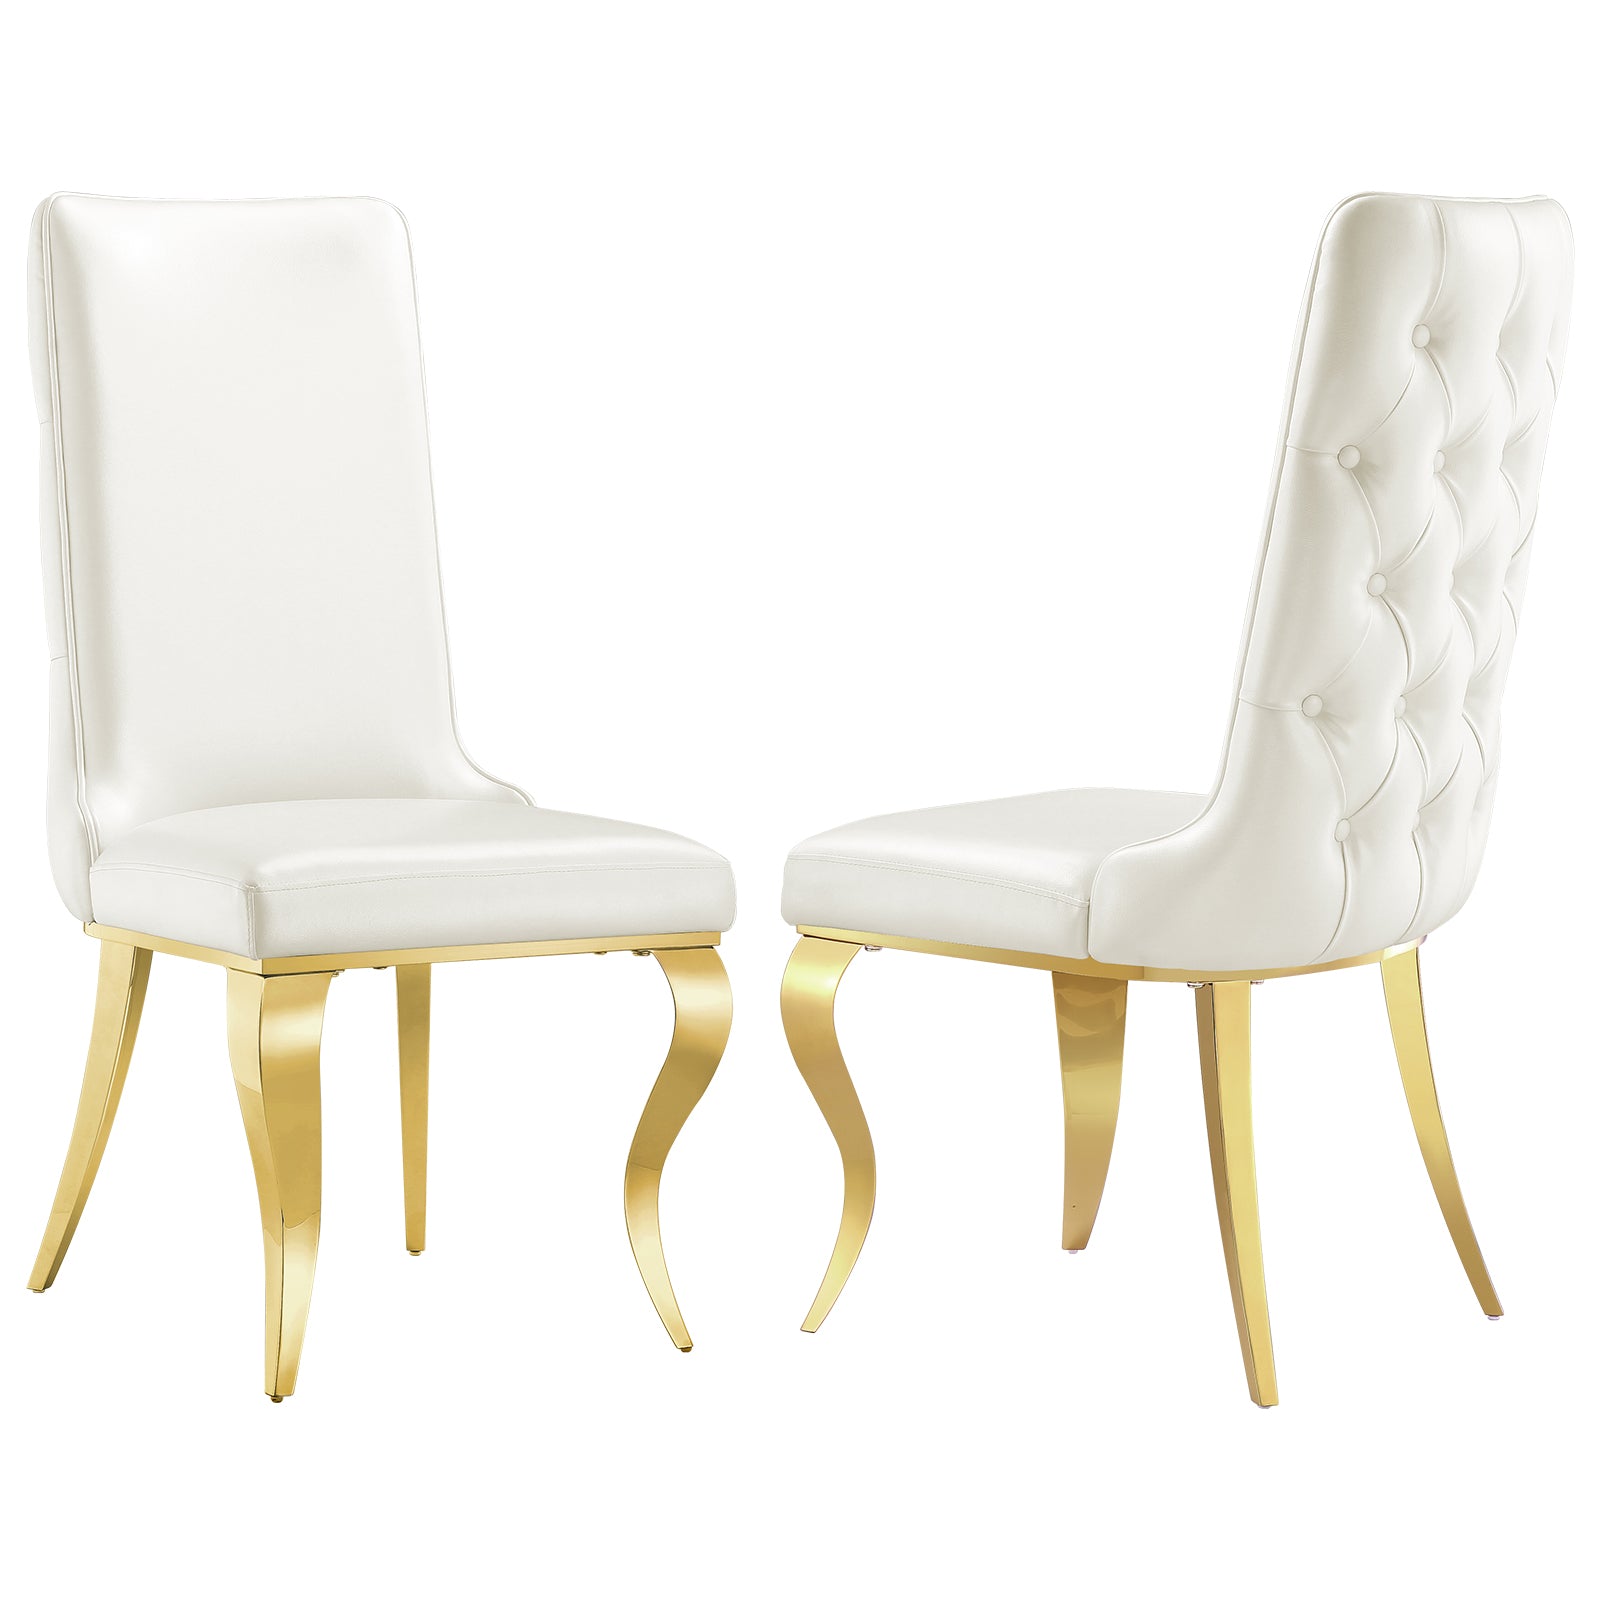 Elevate Your Dining Experience with White Faux Leather Dining Chairs